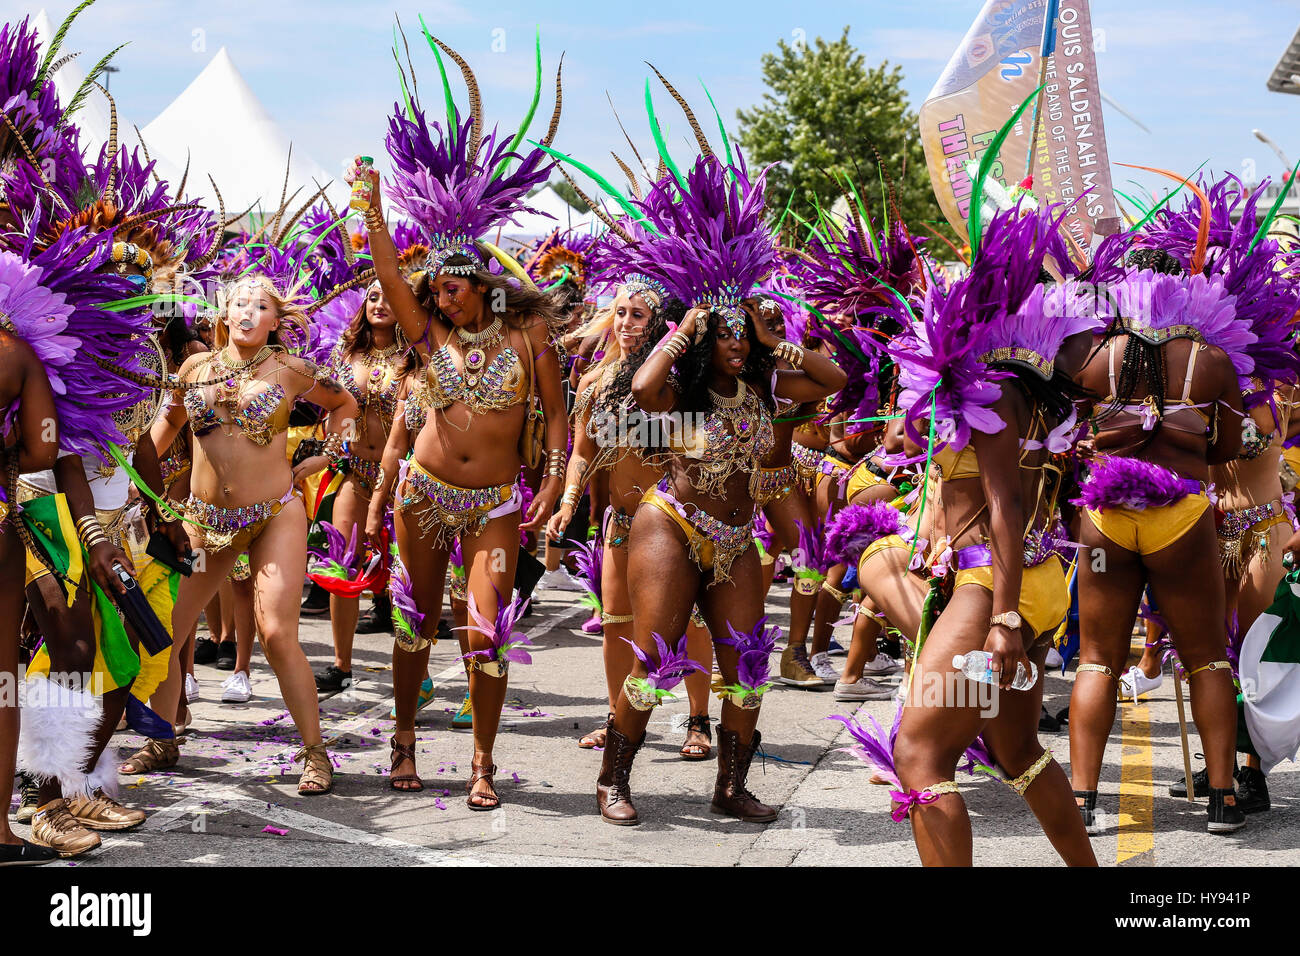 TORONTO, CANADA - JULY 20, 2016: Marchers in costume at The Toronto Caribbean Carnival, formerly called Caribana, a festival of Caribbean Stock Photo